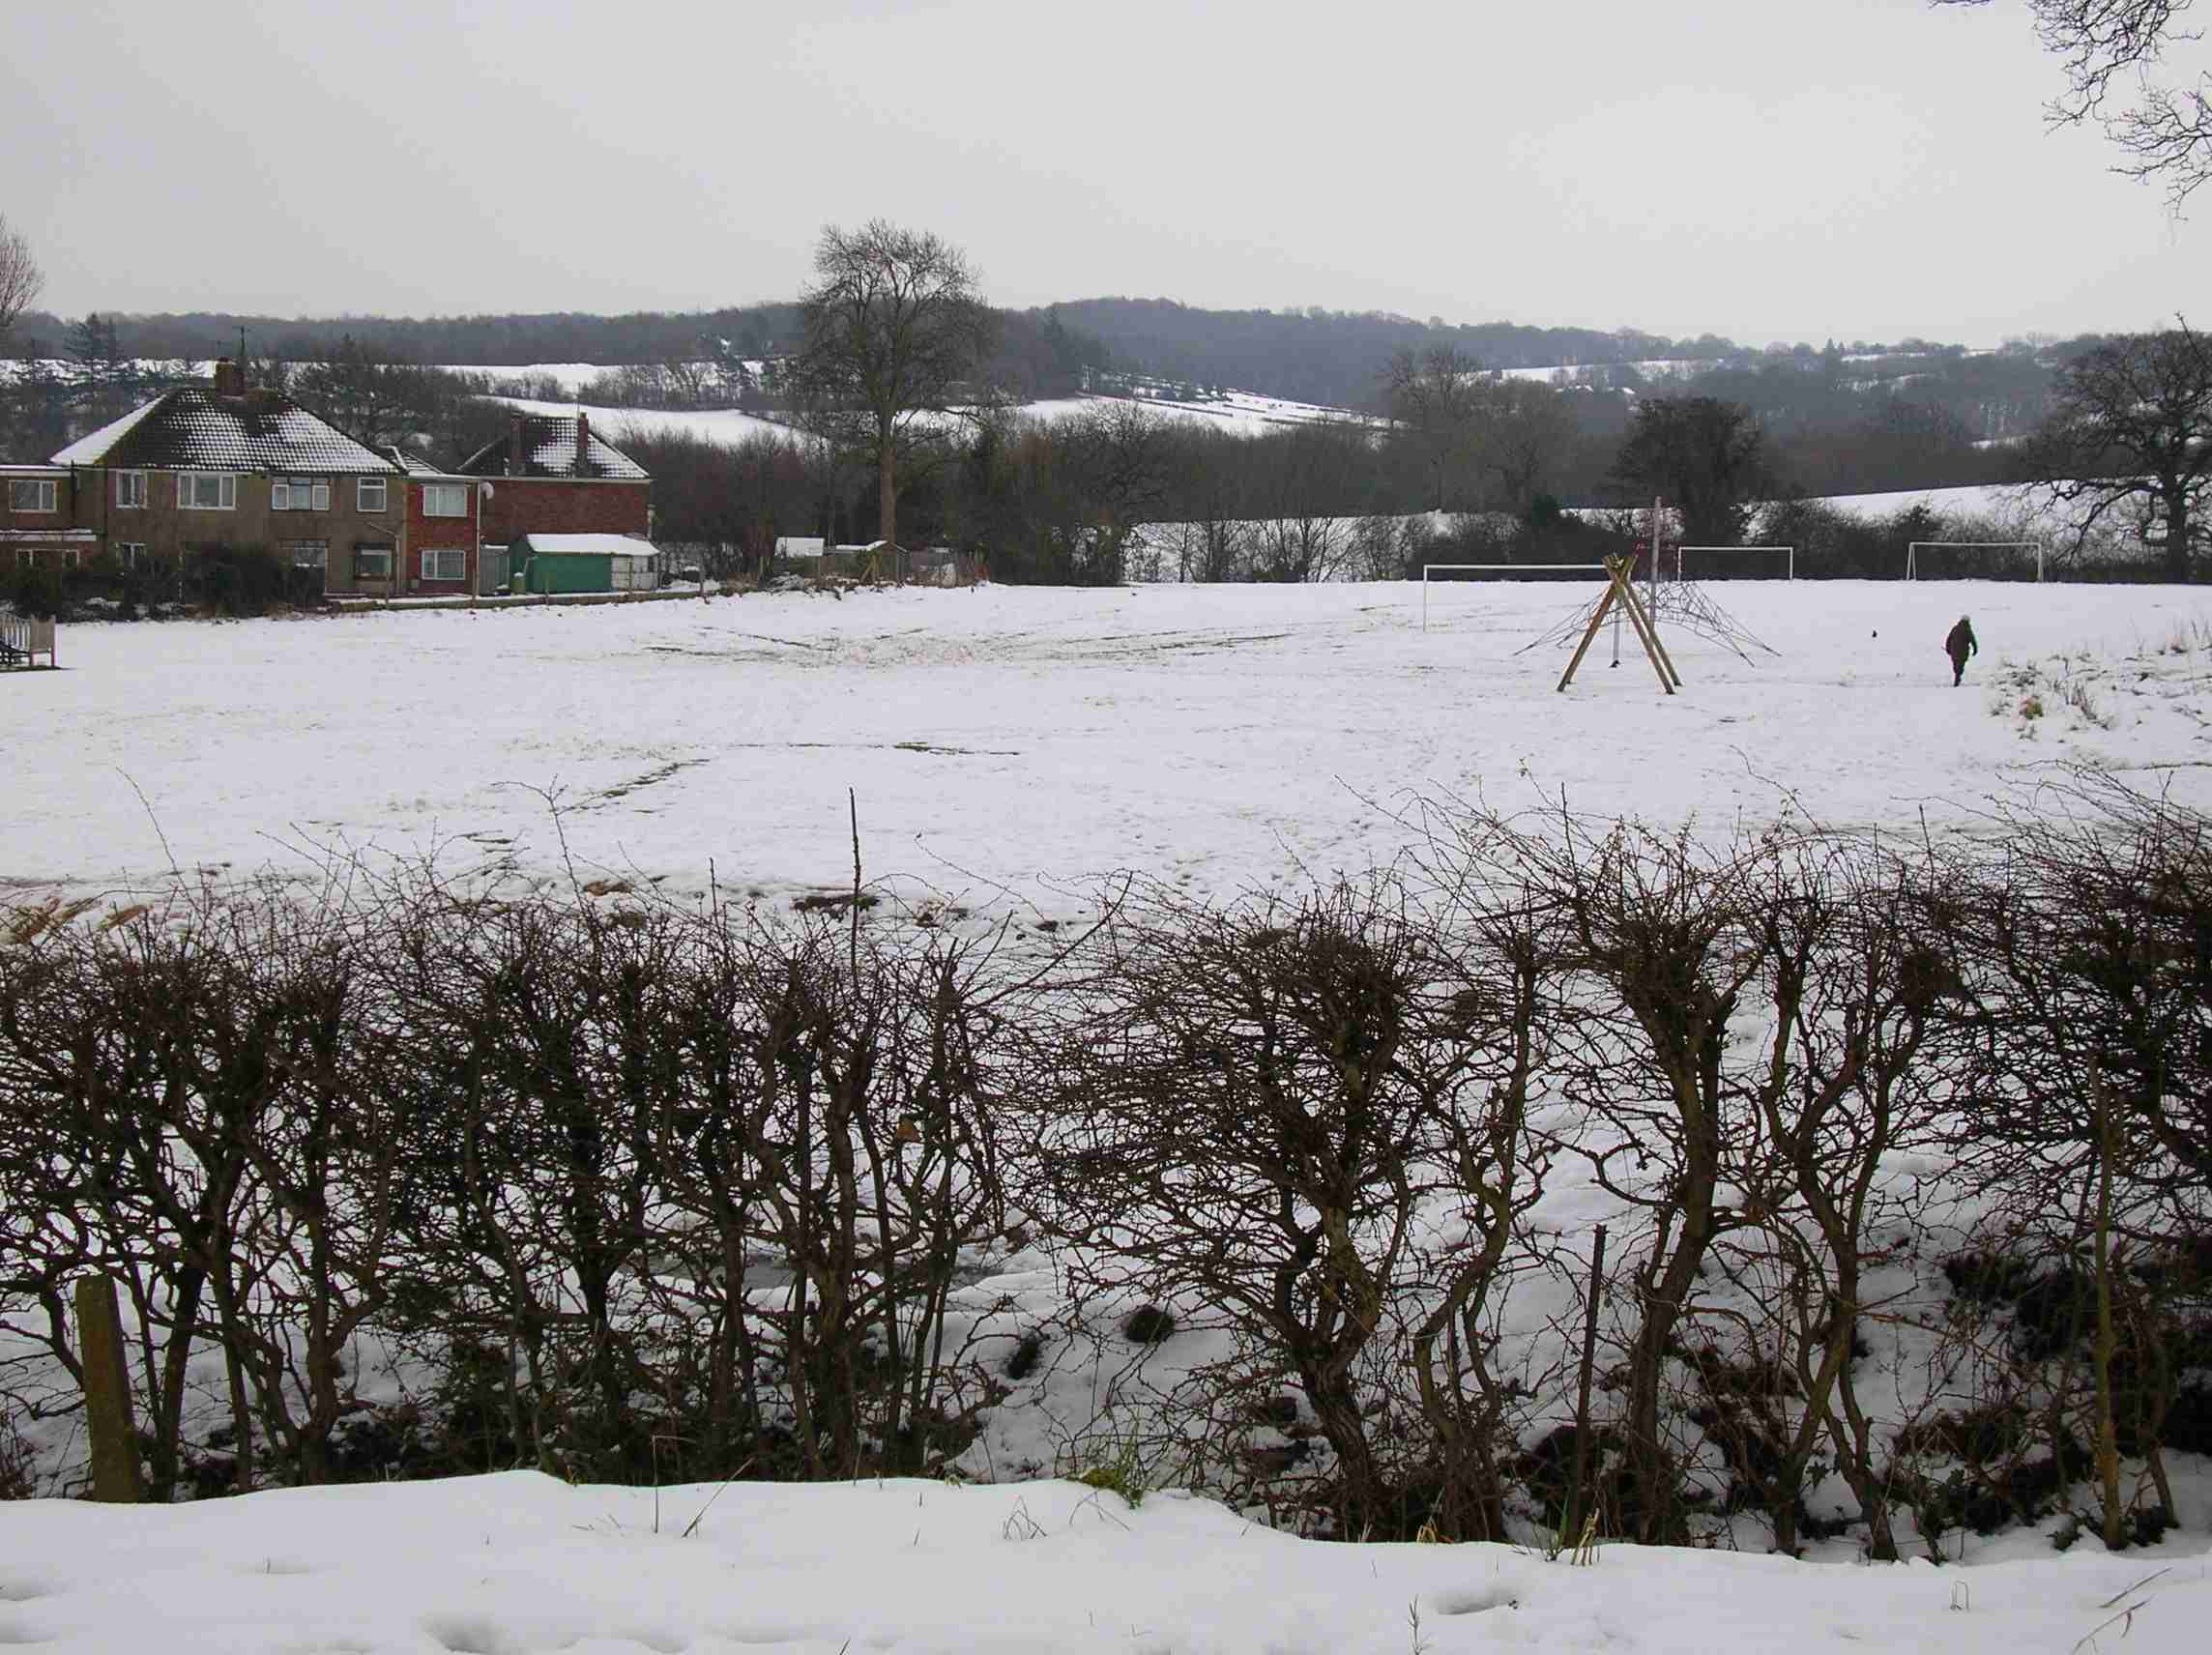 View of Totley in the snow